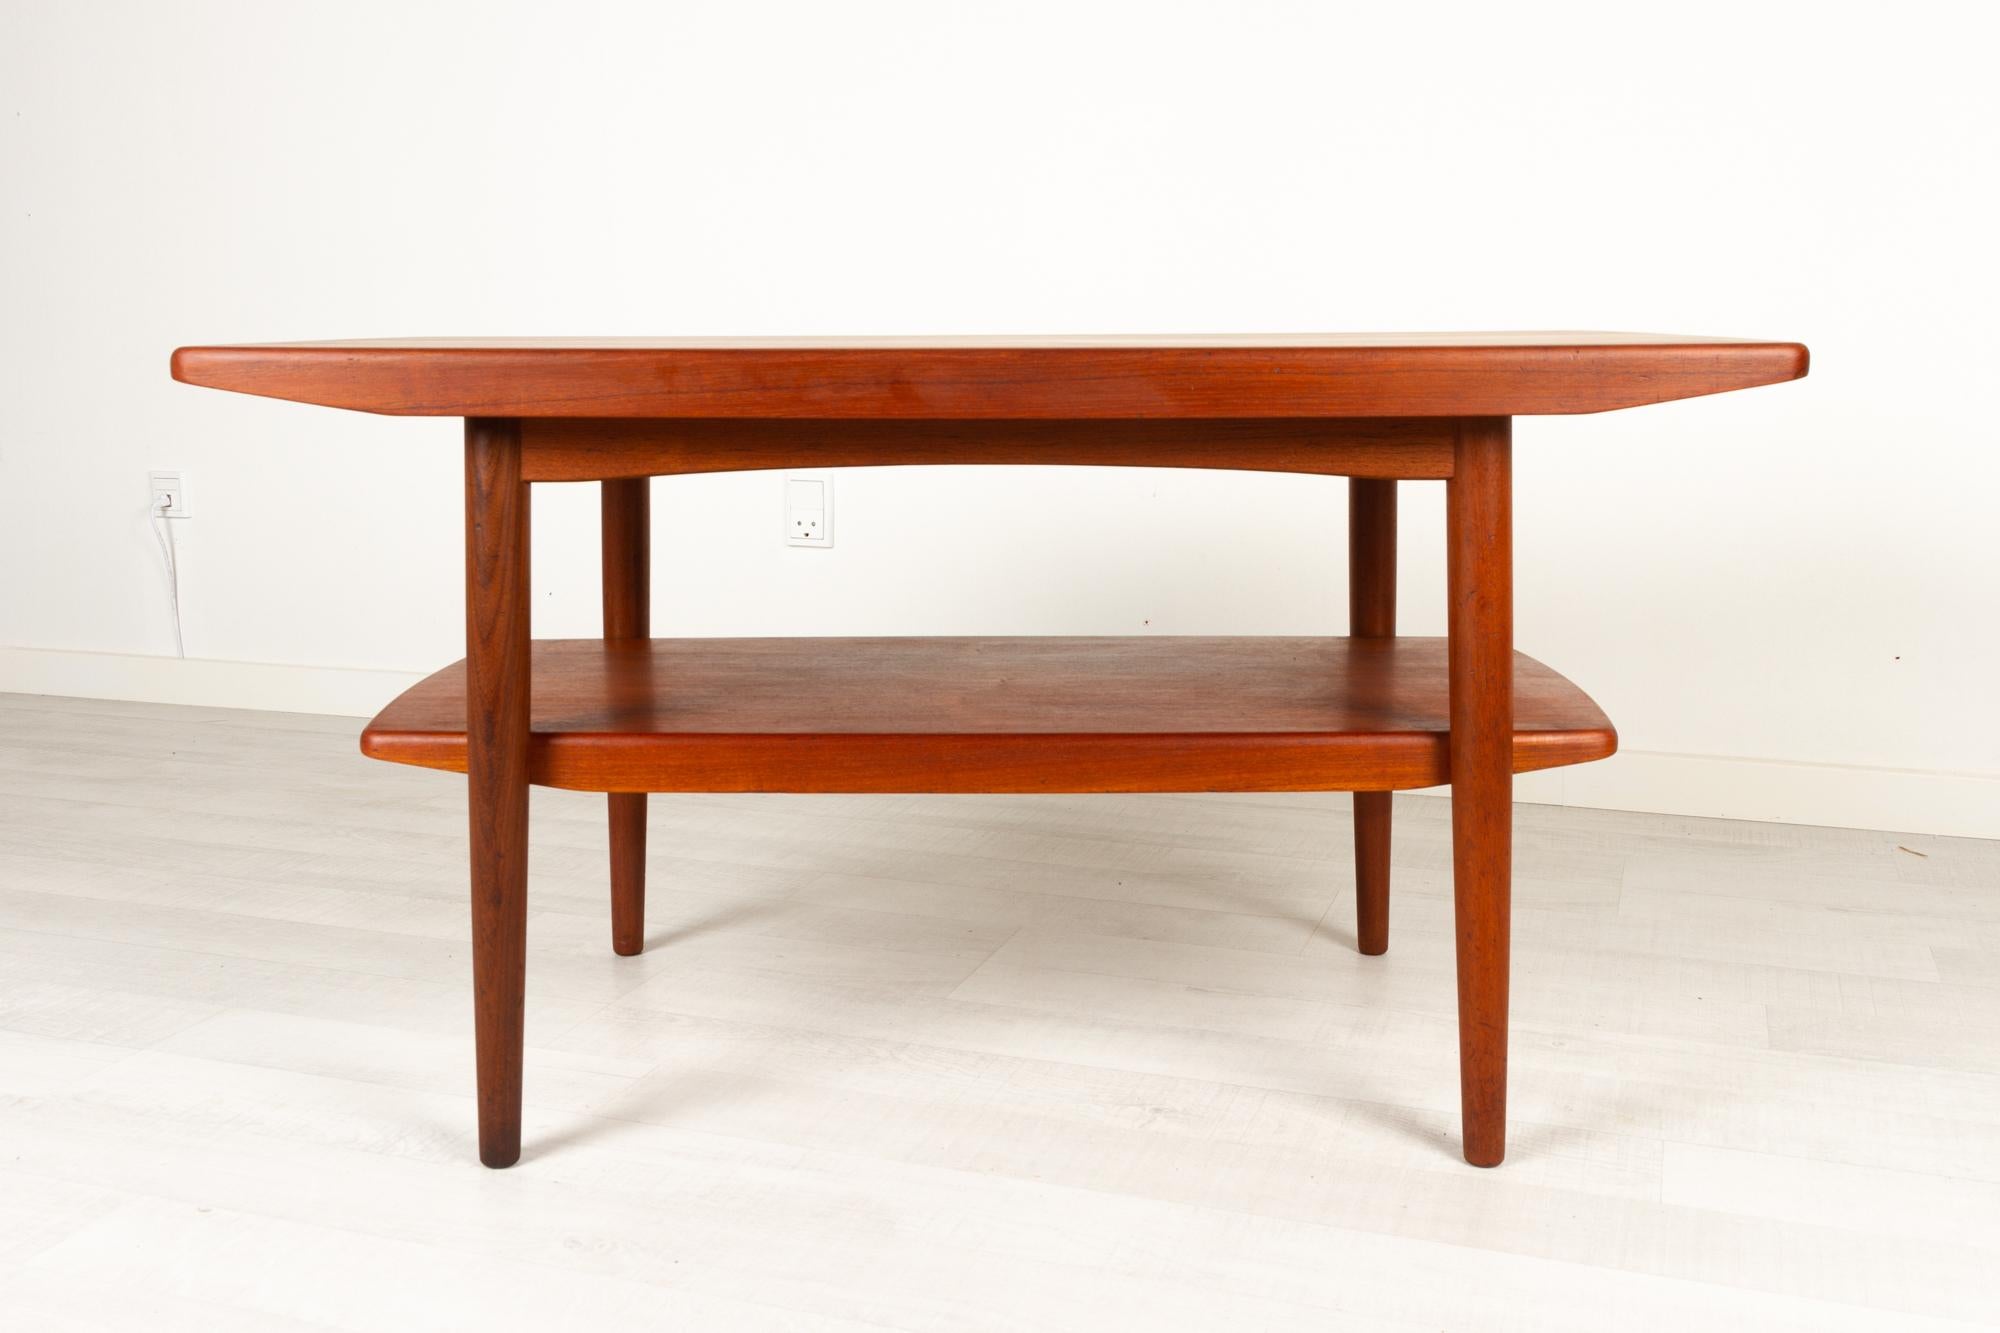 Vintage Danish teak coffee table with shelf 1960s
Danish Mid-Century Modern compact and elegant coffee table with underlying magazine shelf. Very good build quality and craftsmanship. Round tapered legs in solid teak. Table top and shelf edged with